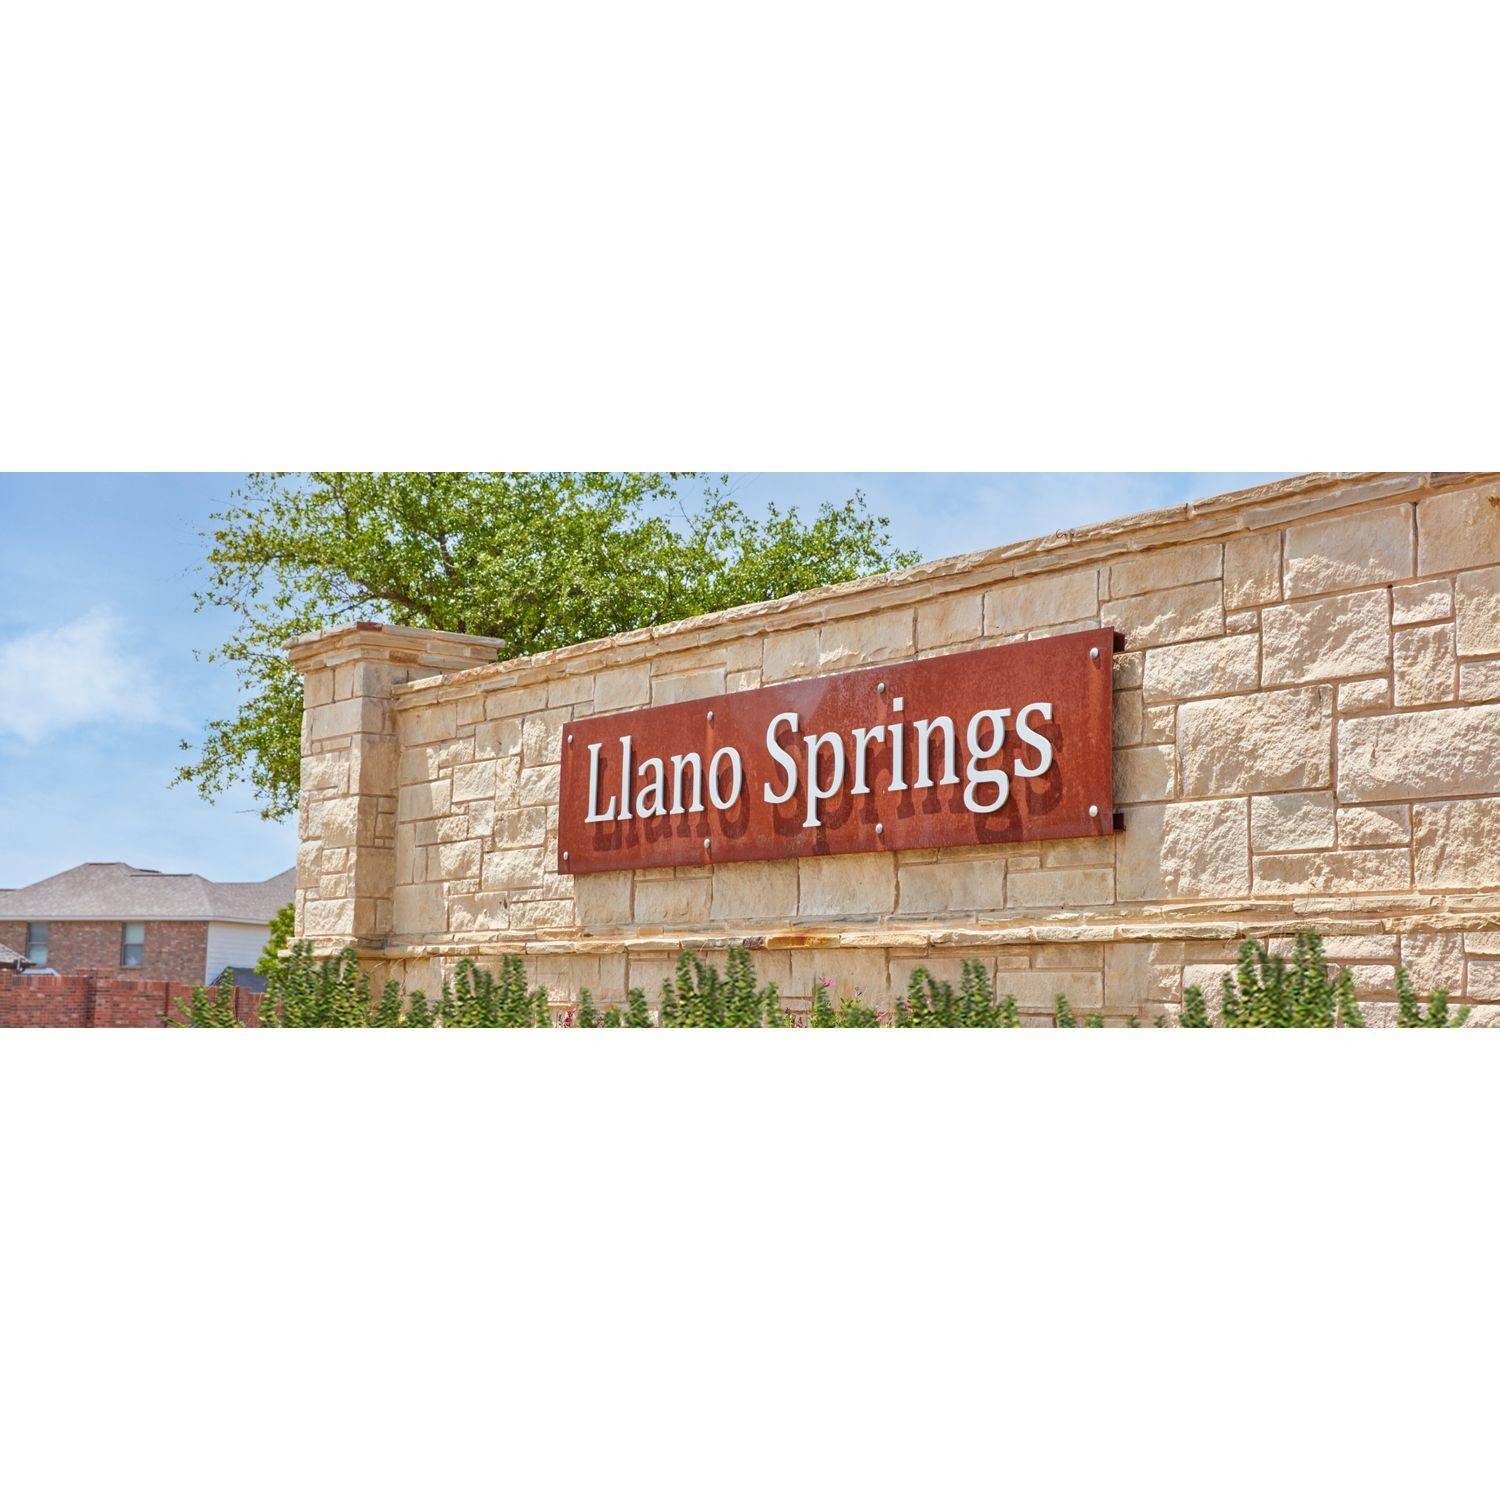 Llano Springs Watermill building at 8408 Hollow Bend Street, Fort Worth, TX 76123